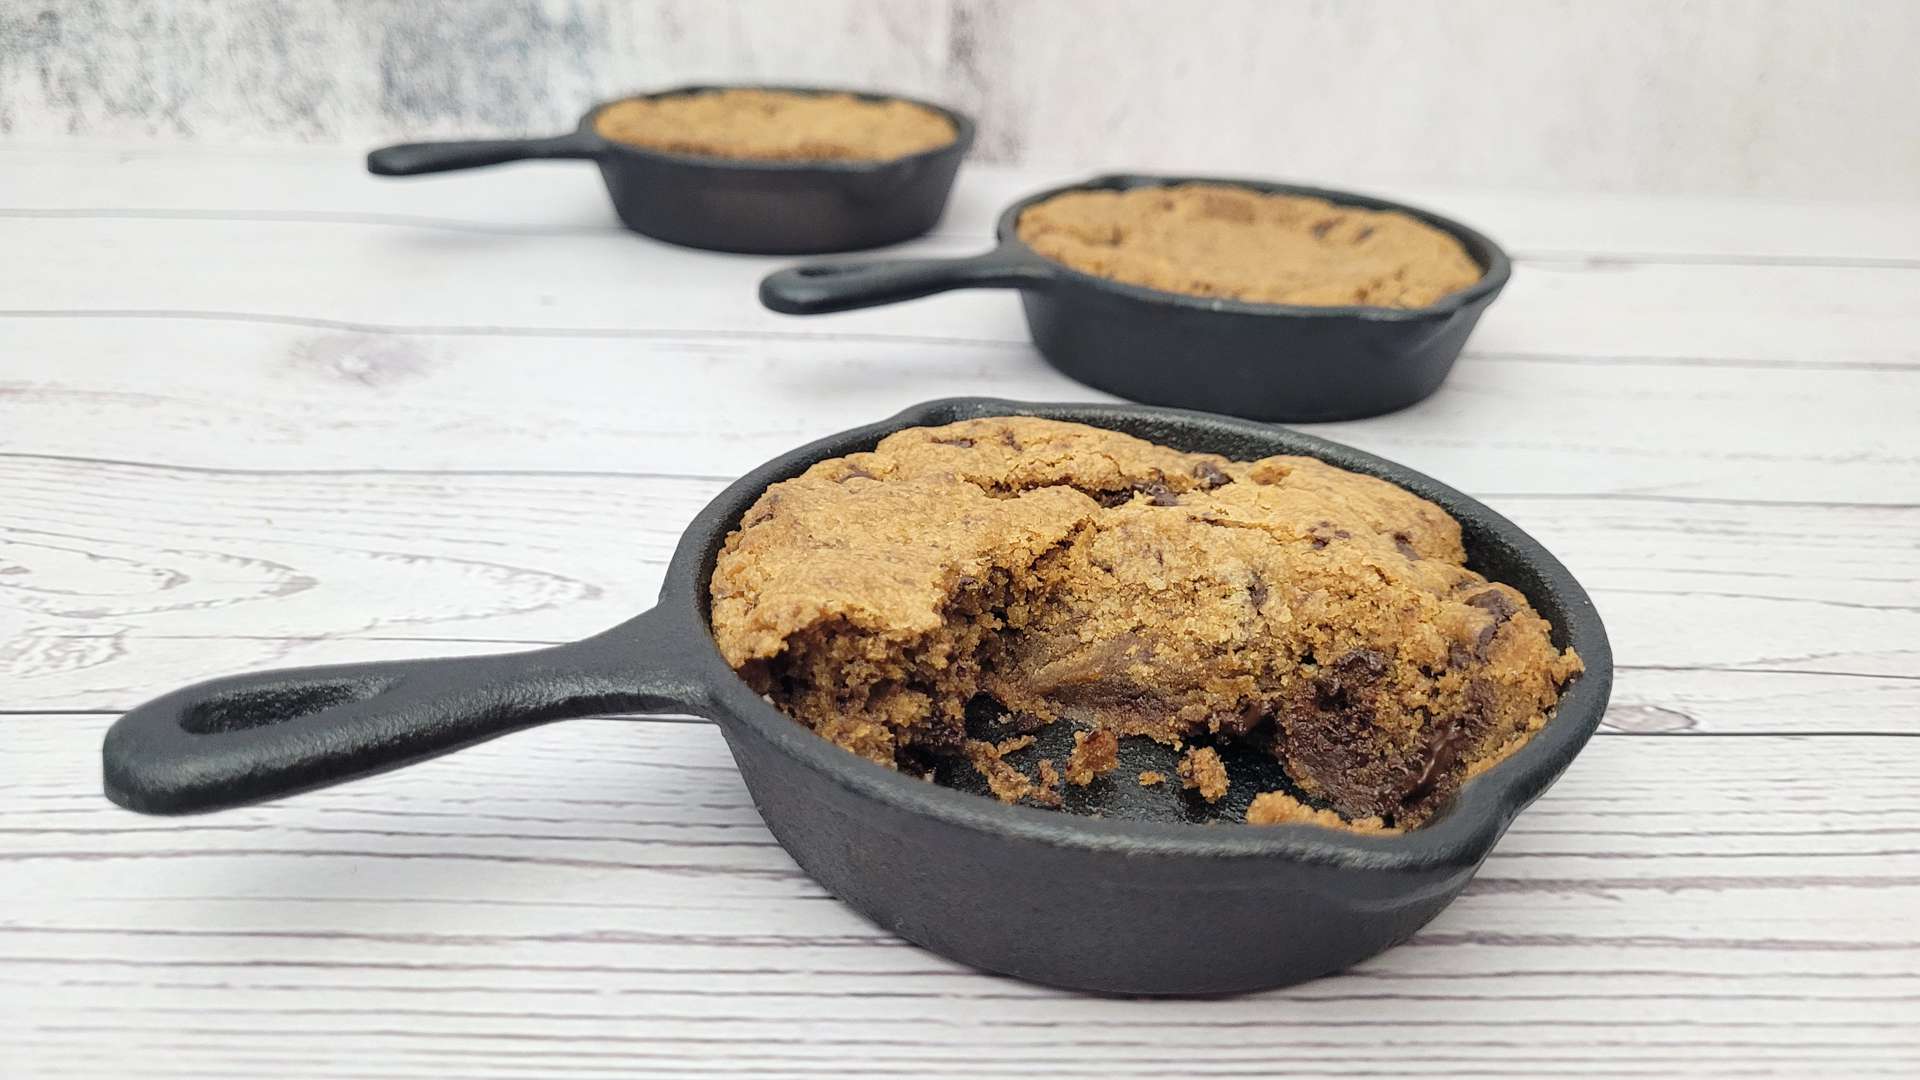 mini cast iron skillets with chocolate chip cookie and one is cut into